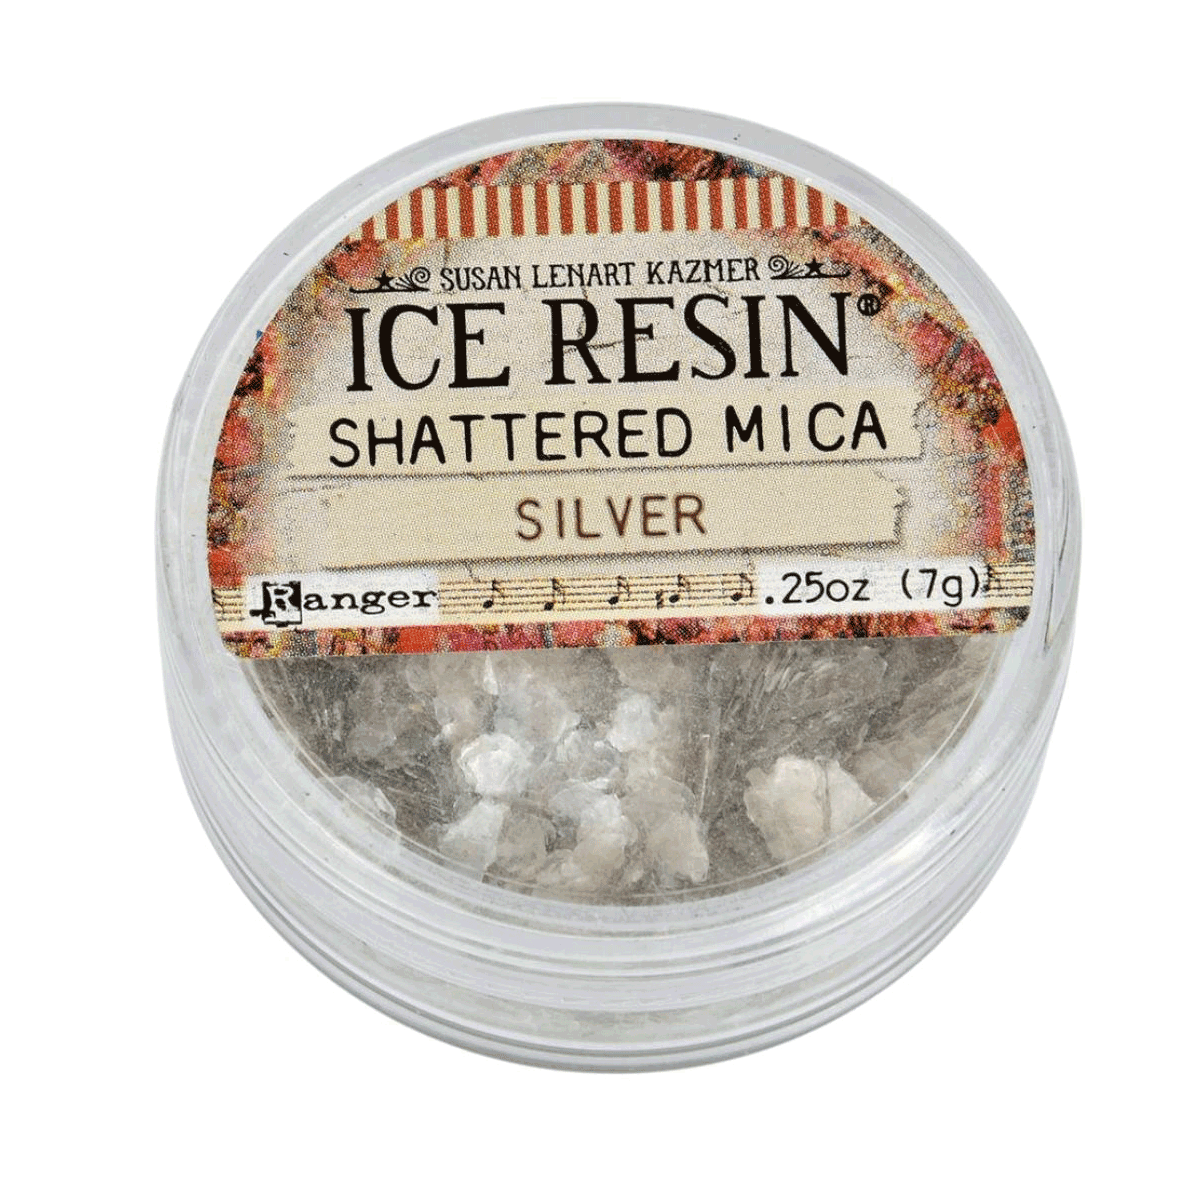 ICE Resin, Shattered Mica Silver